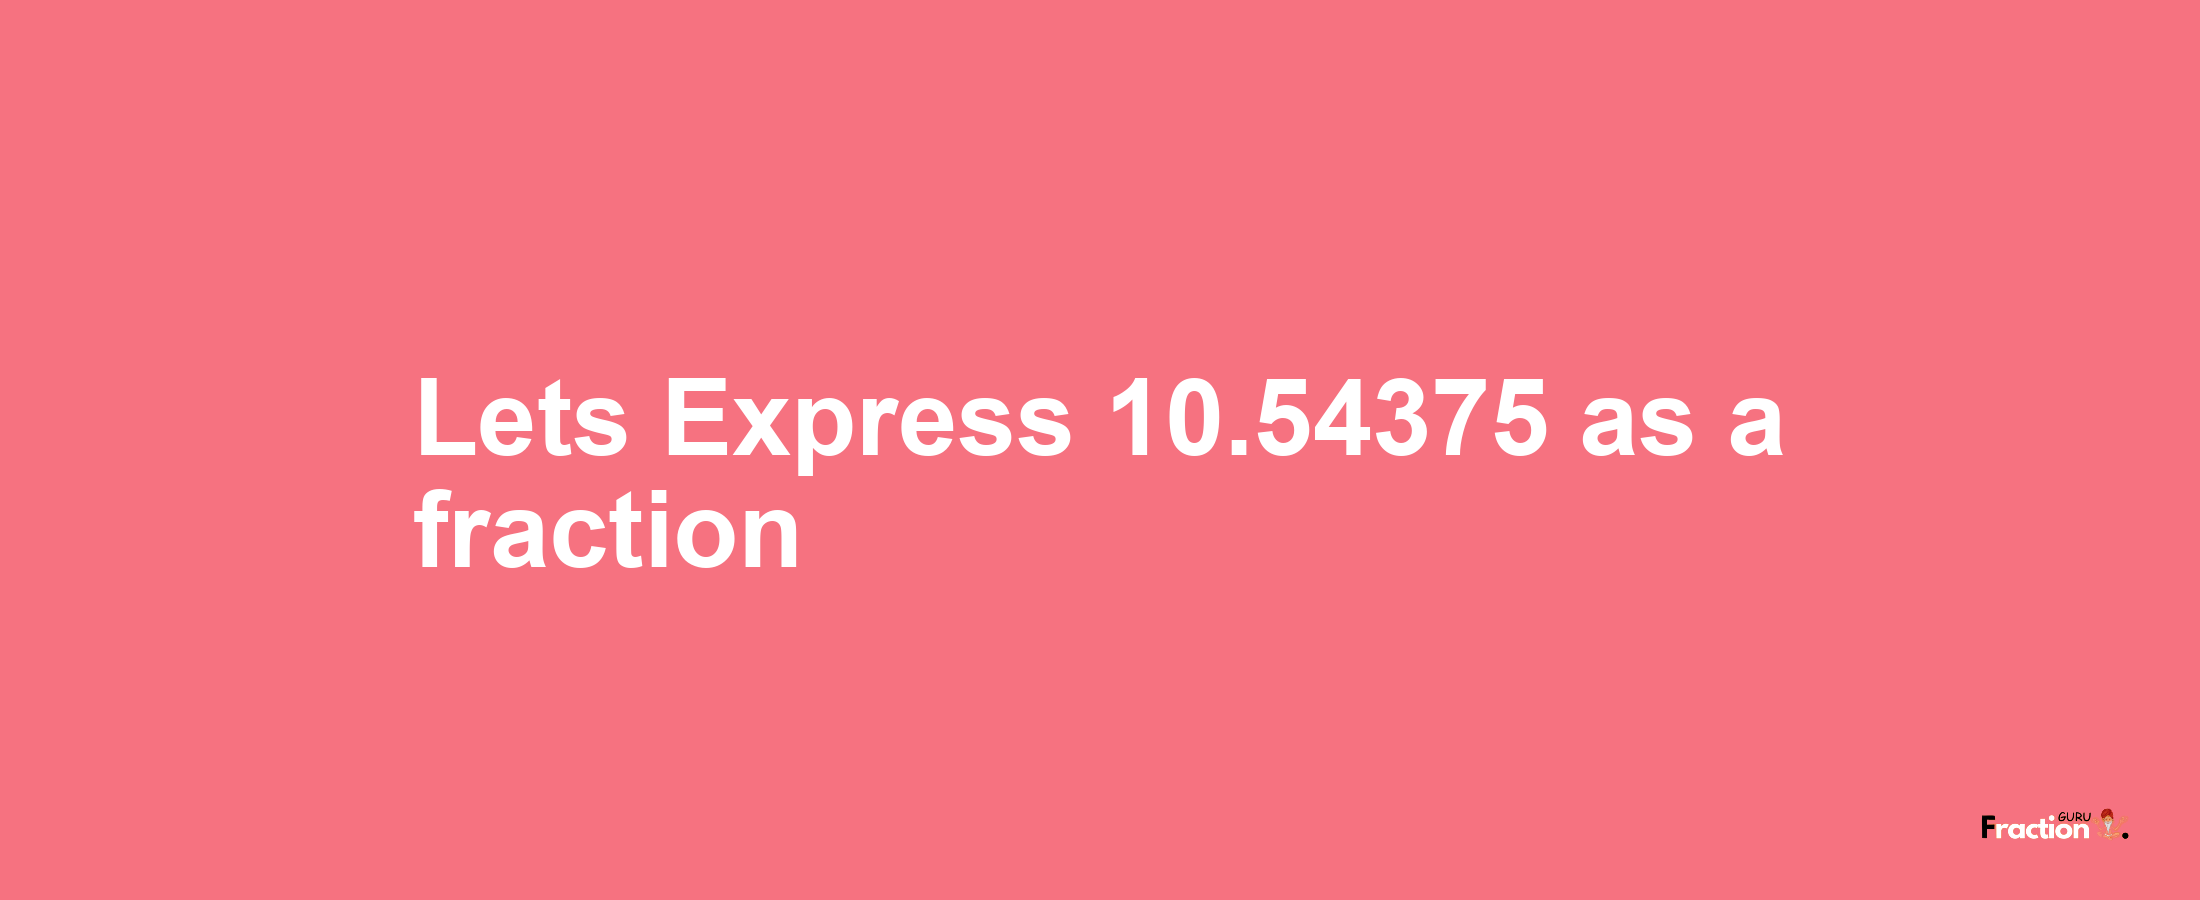 Lets Express 10.54375 as afraction